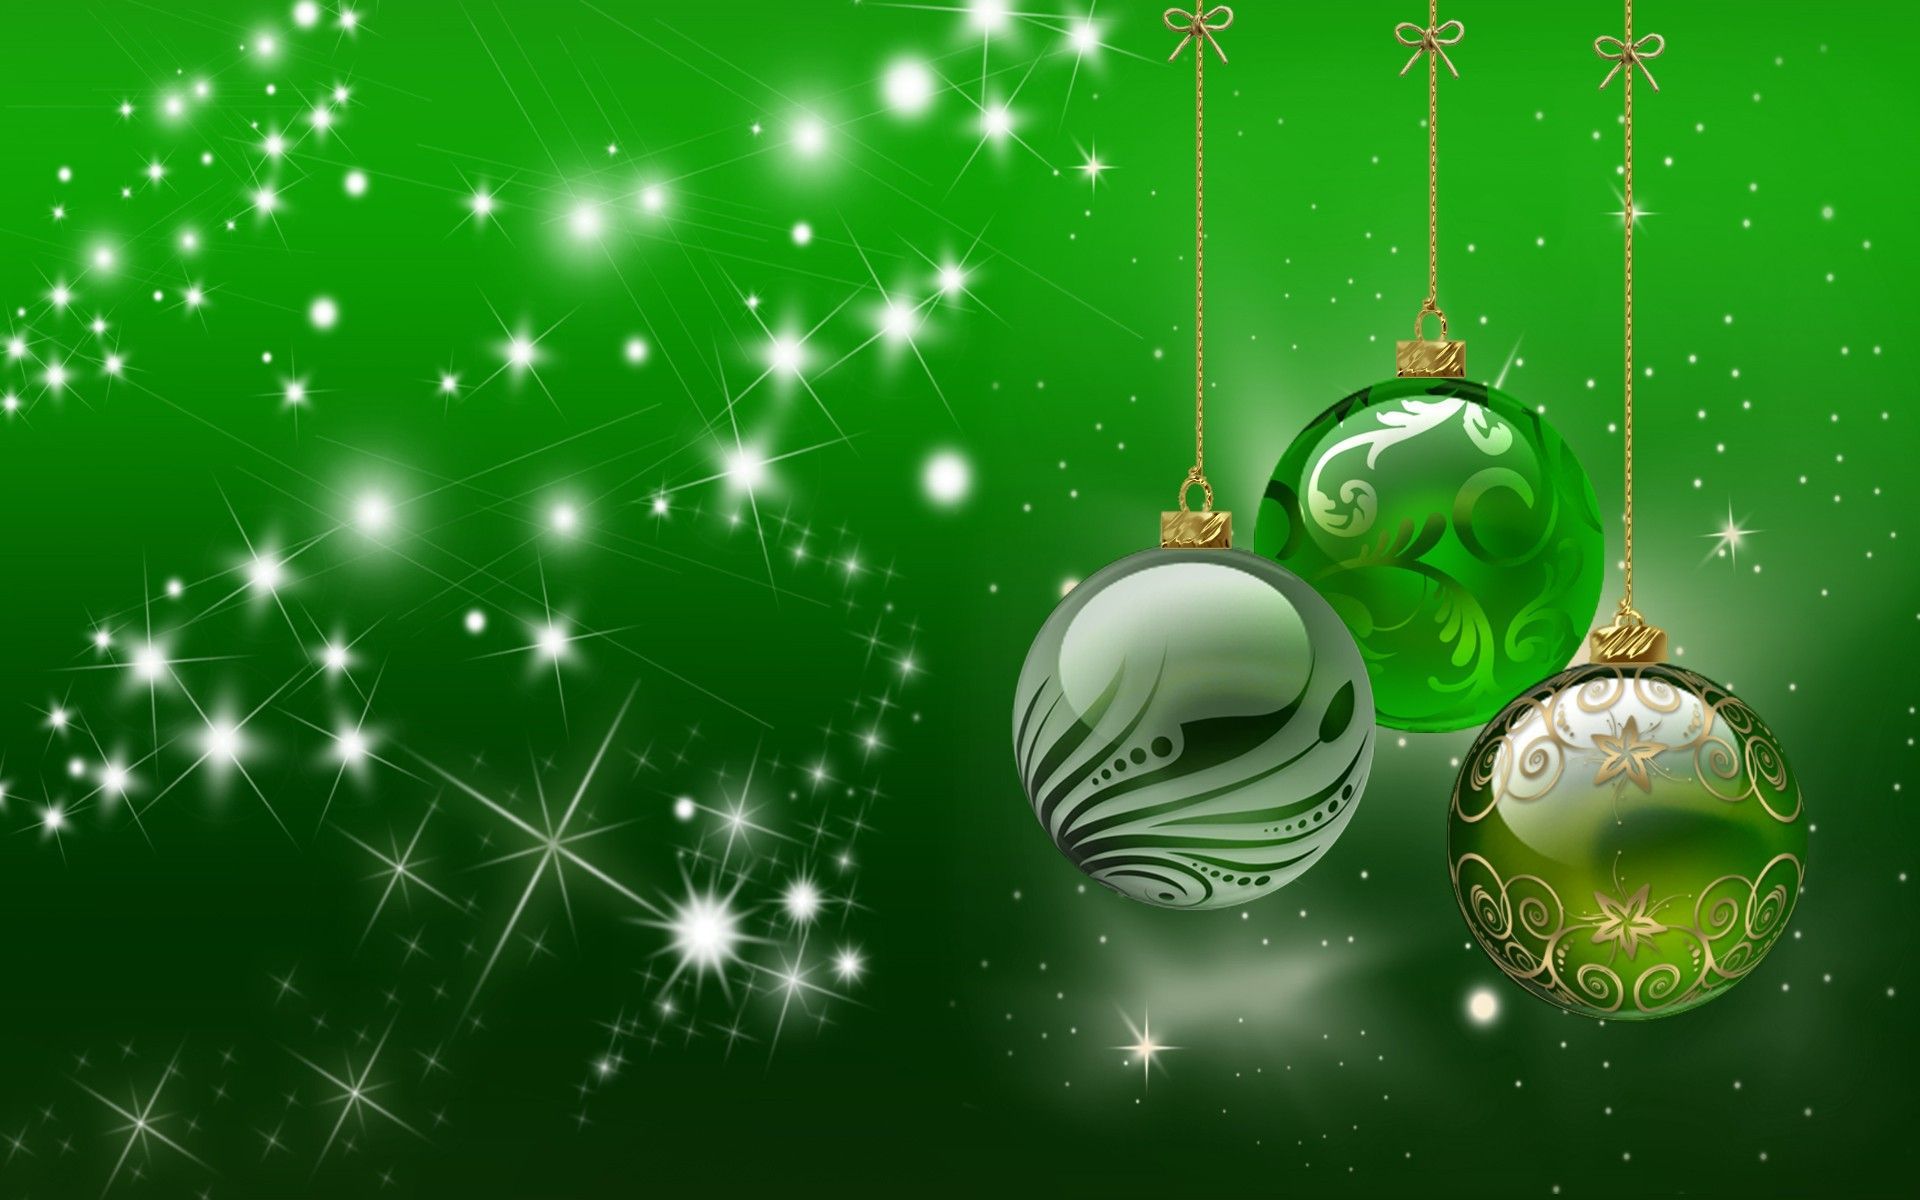 Holiday HD Wallpaper, Holiday Animated Images, New Wallpapers